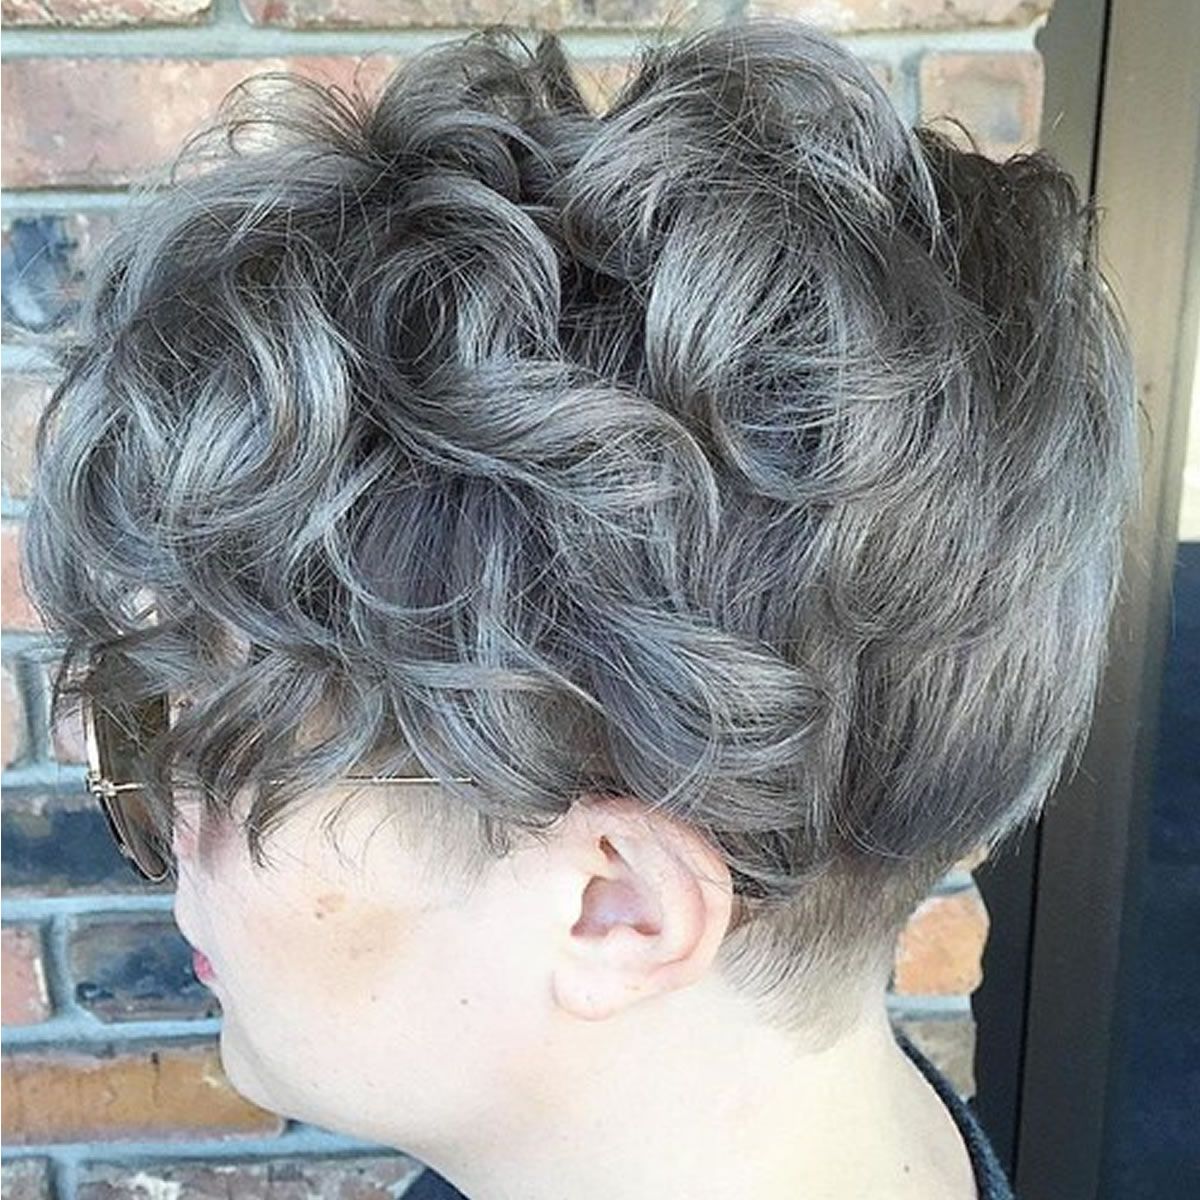 Short Grey Curly Silver Hairstyles – Hairstyles Inside Curly Grayhairstyles (View 19 of 25)